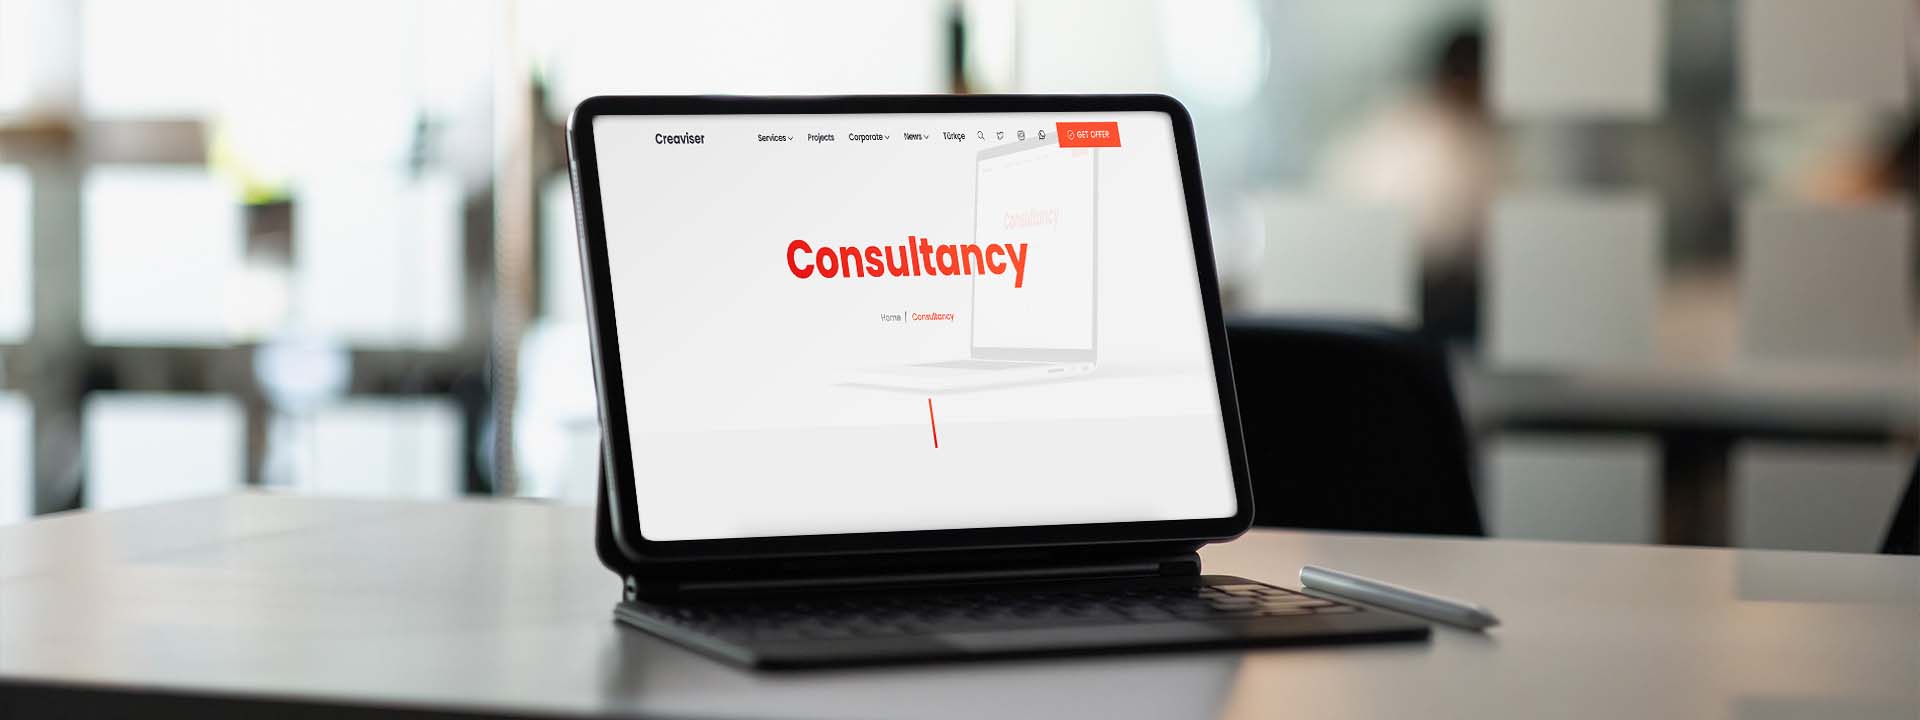 Consultancy Frequently Asked Questions